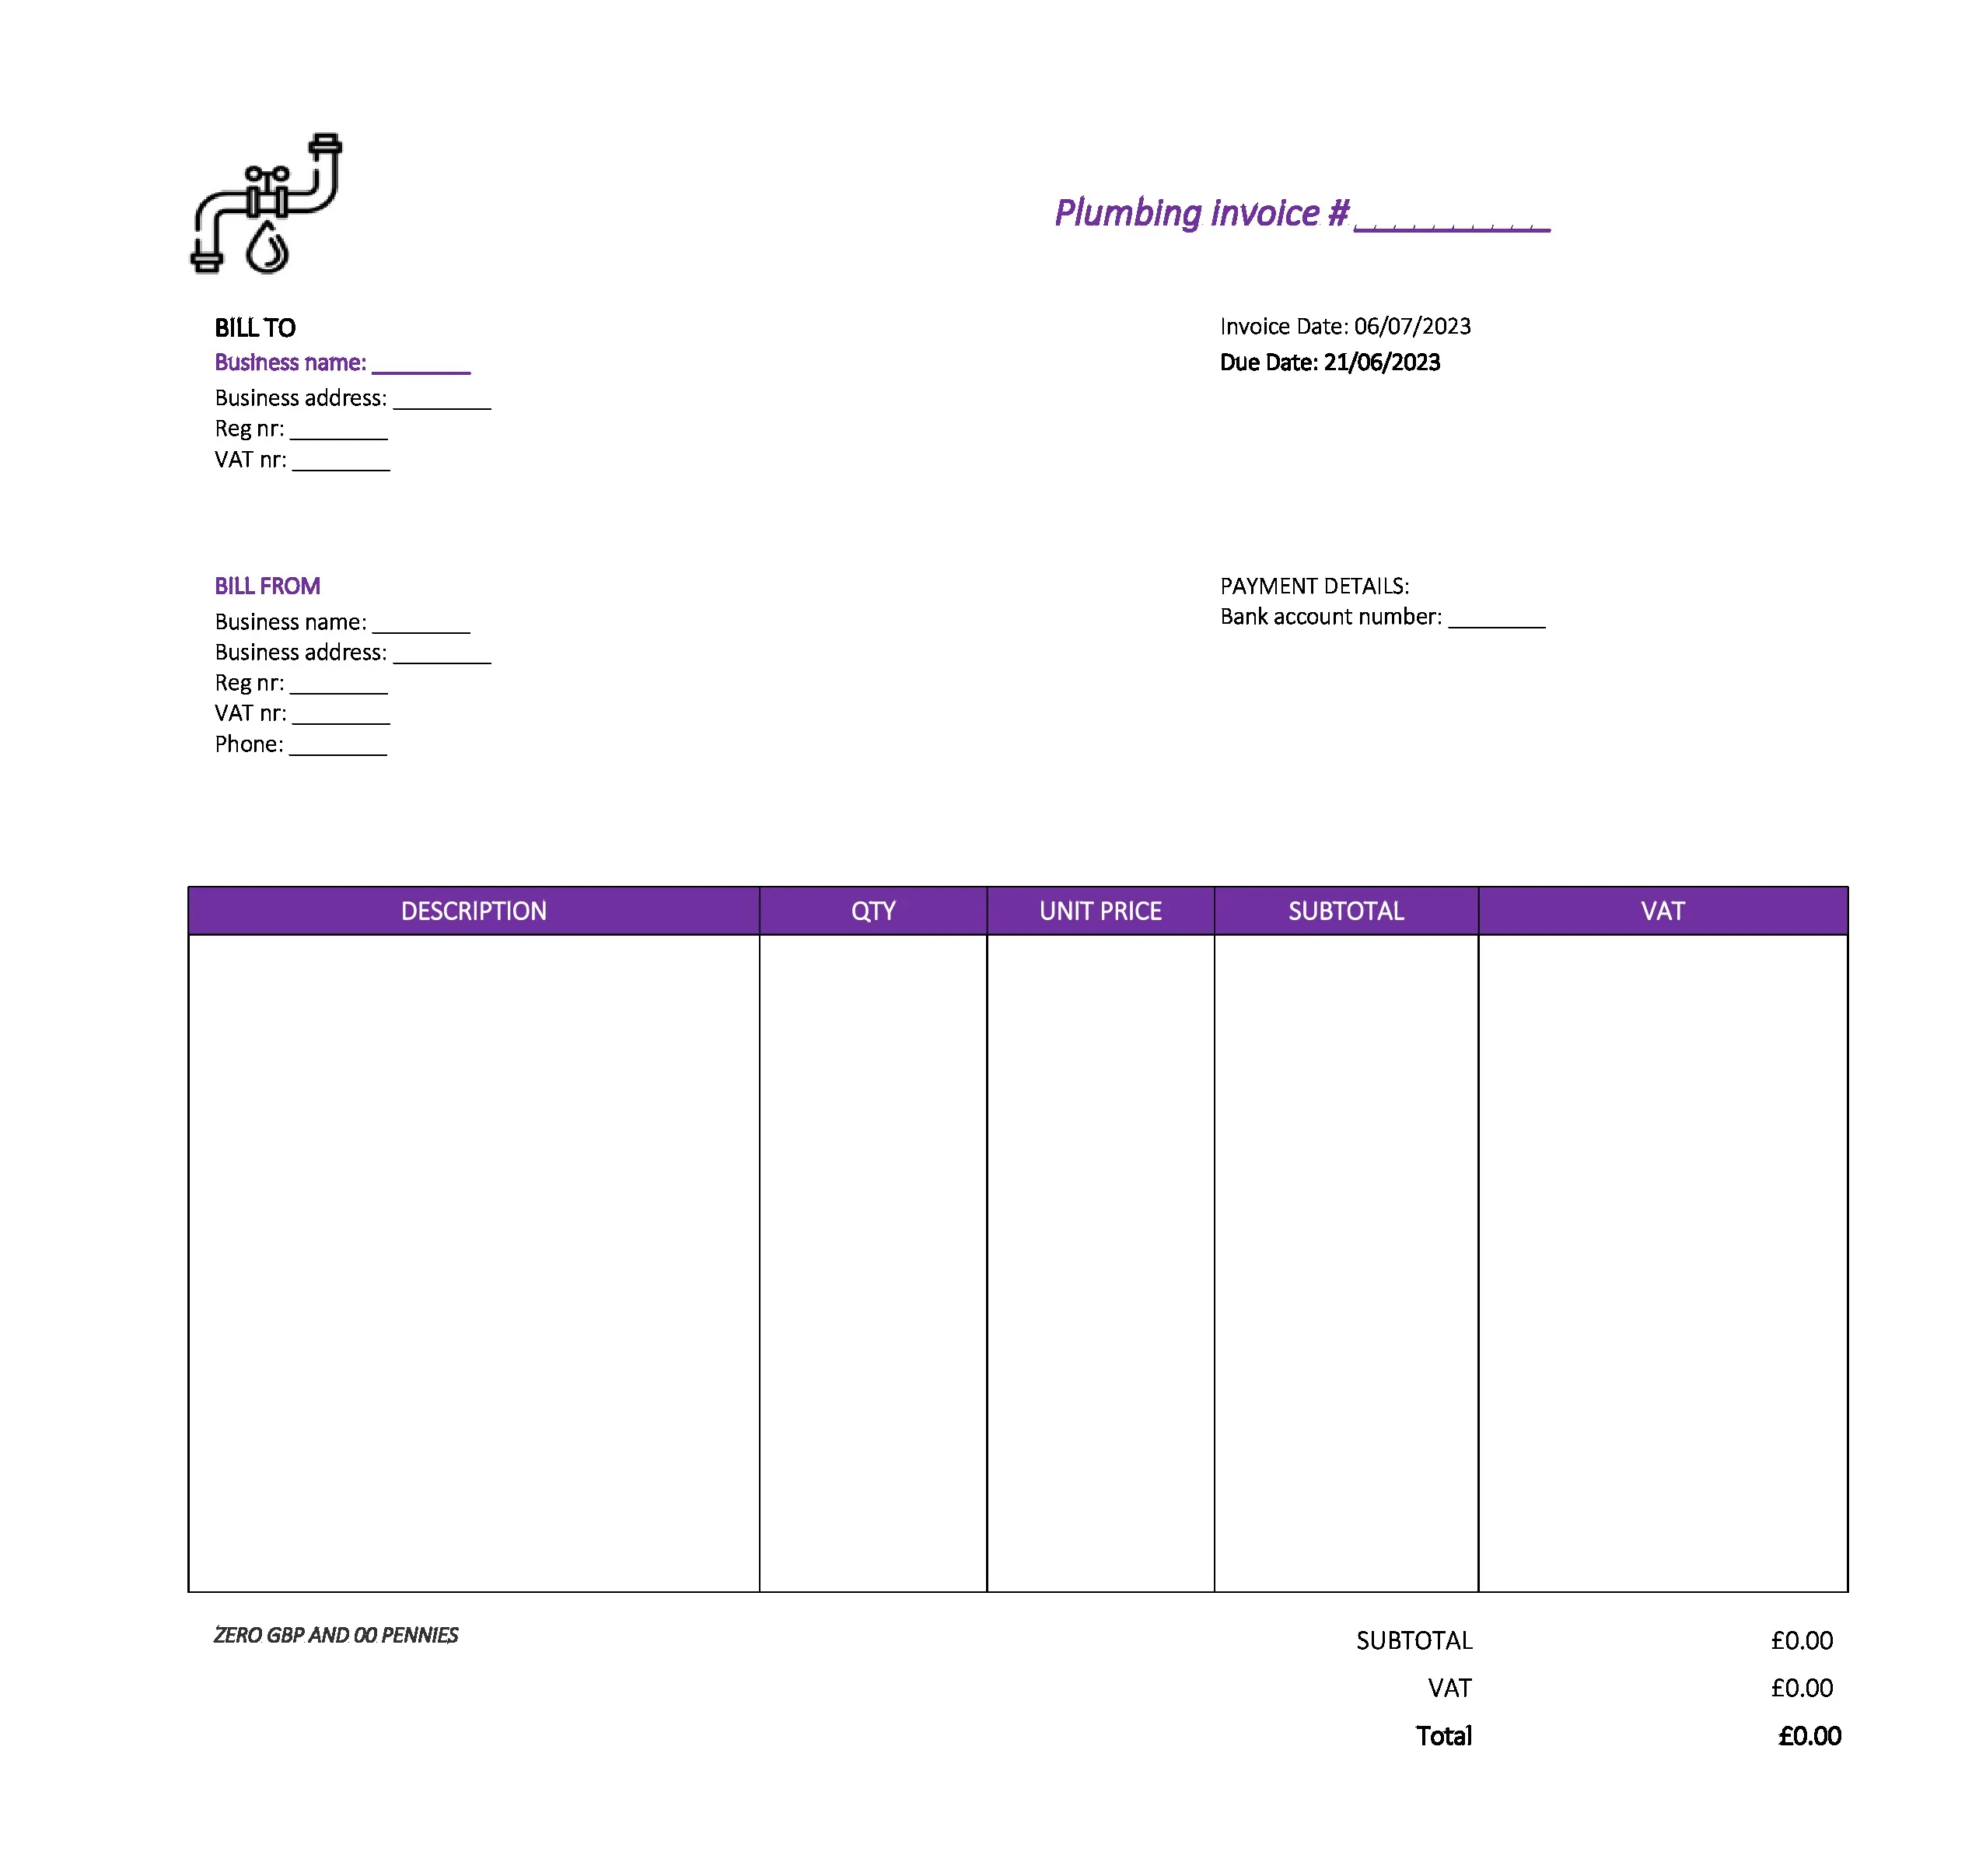 cool plumbing invoice template UK Excel / Google sheets